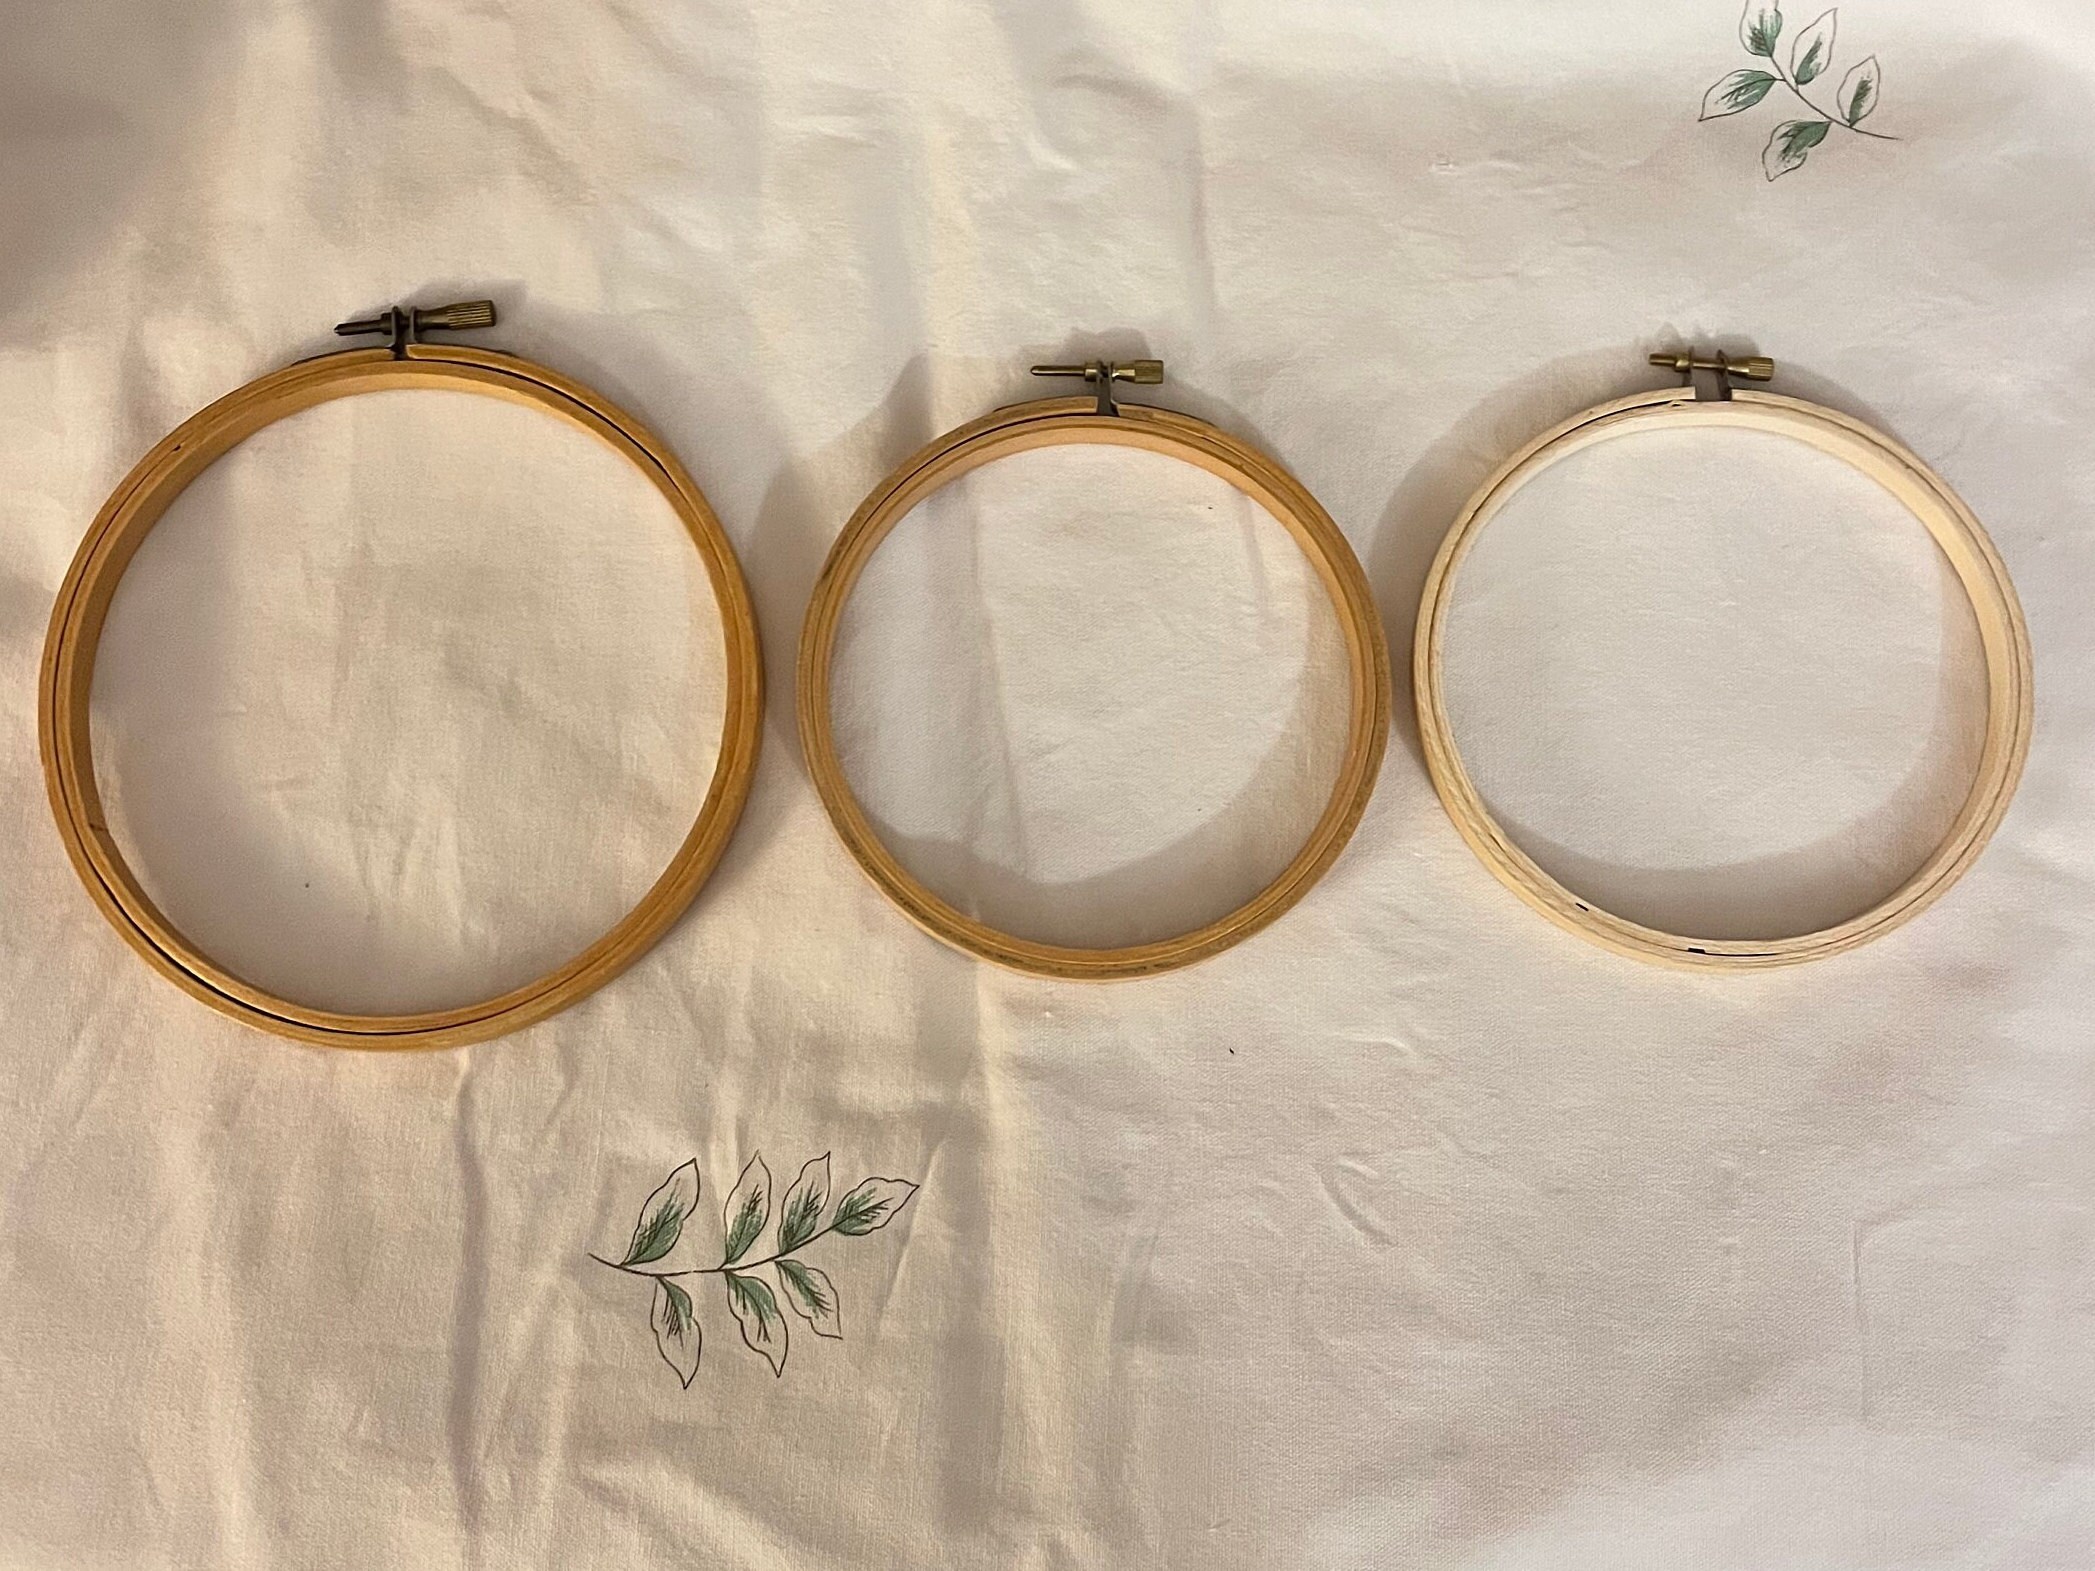 Wooden Embroidery Hoops Stitching Wooden Hoops&stands Cross Stitch  Hoop,round Frame, Hoop Art Embroidery Ring-1 Pieces 